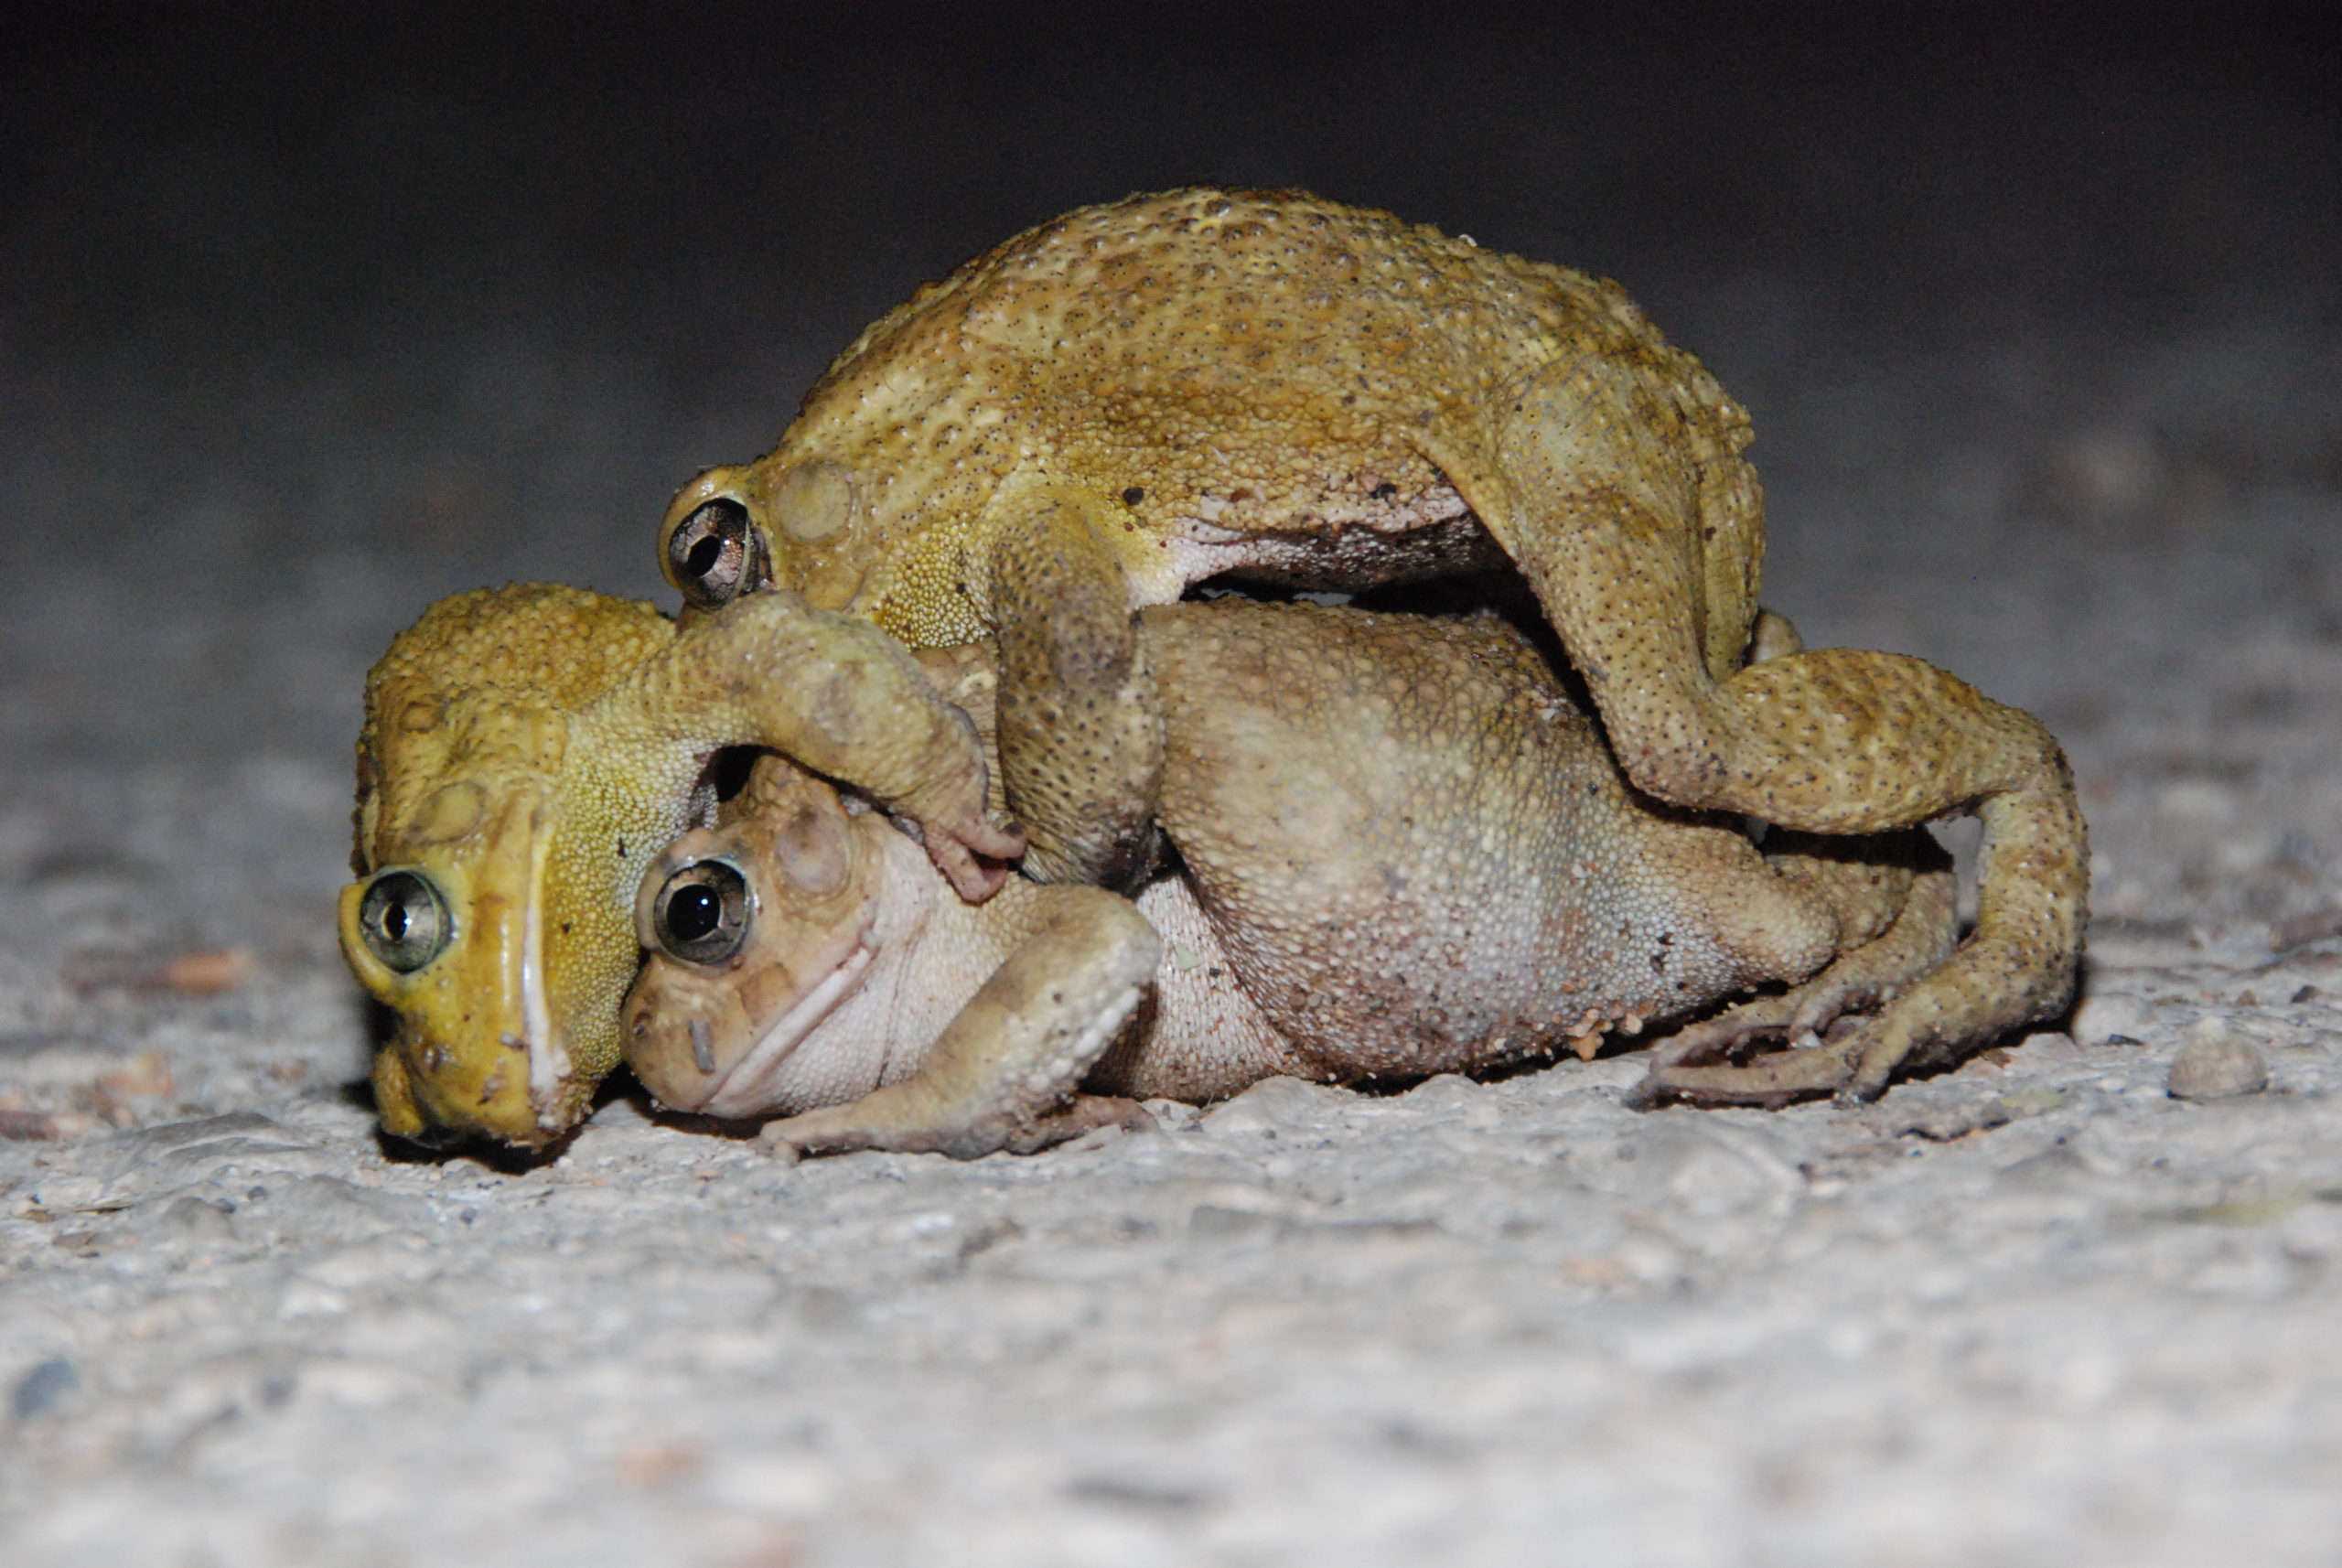 Two smaller male toads compete for mating access to a female (Photo: Nobuyuki Yamaguchi)